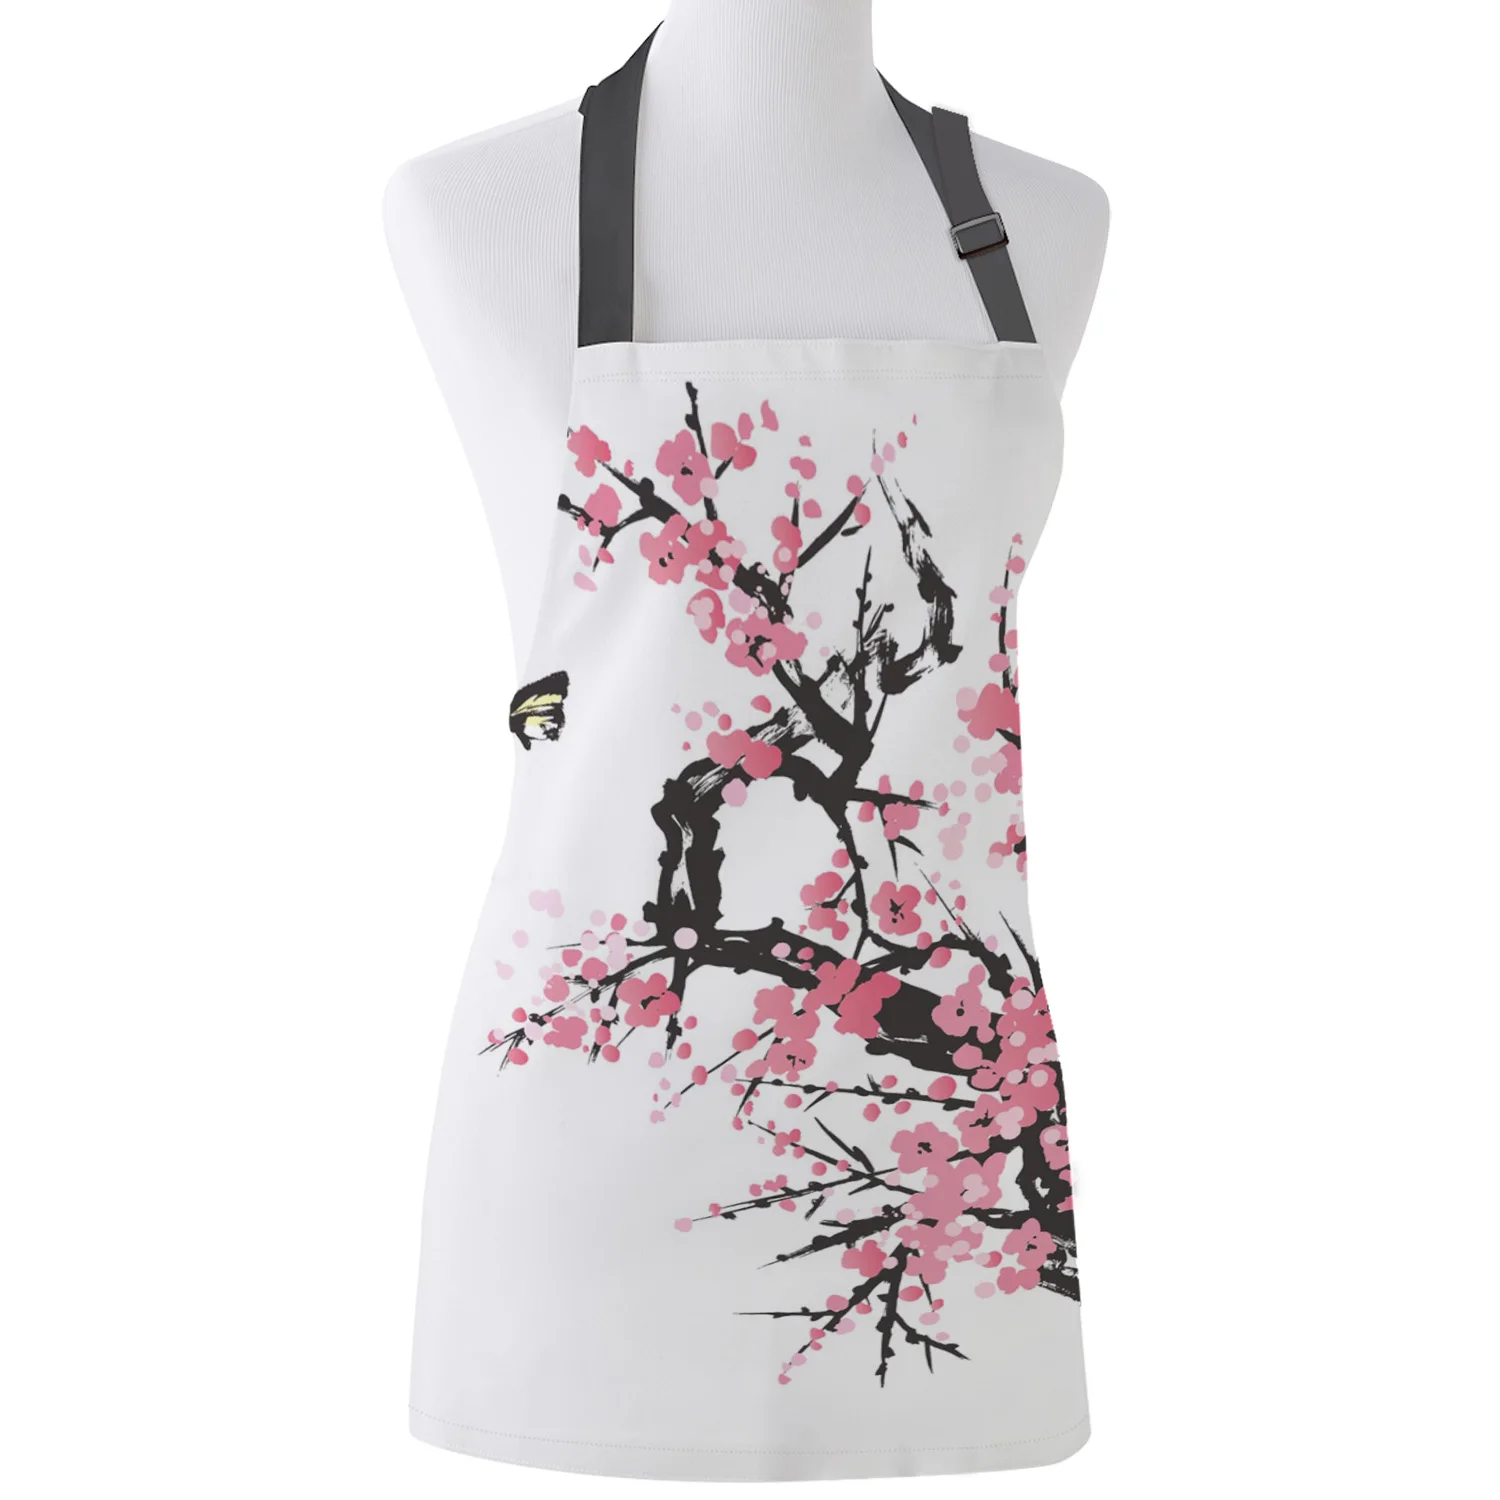 

Kitchen Apron Cherry Blossoms Pink Butterfly Tree Flower Adjustable Bib Canvas Aprons For Women Cooking Baking Pinafore